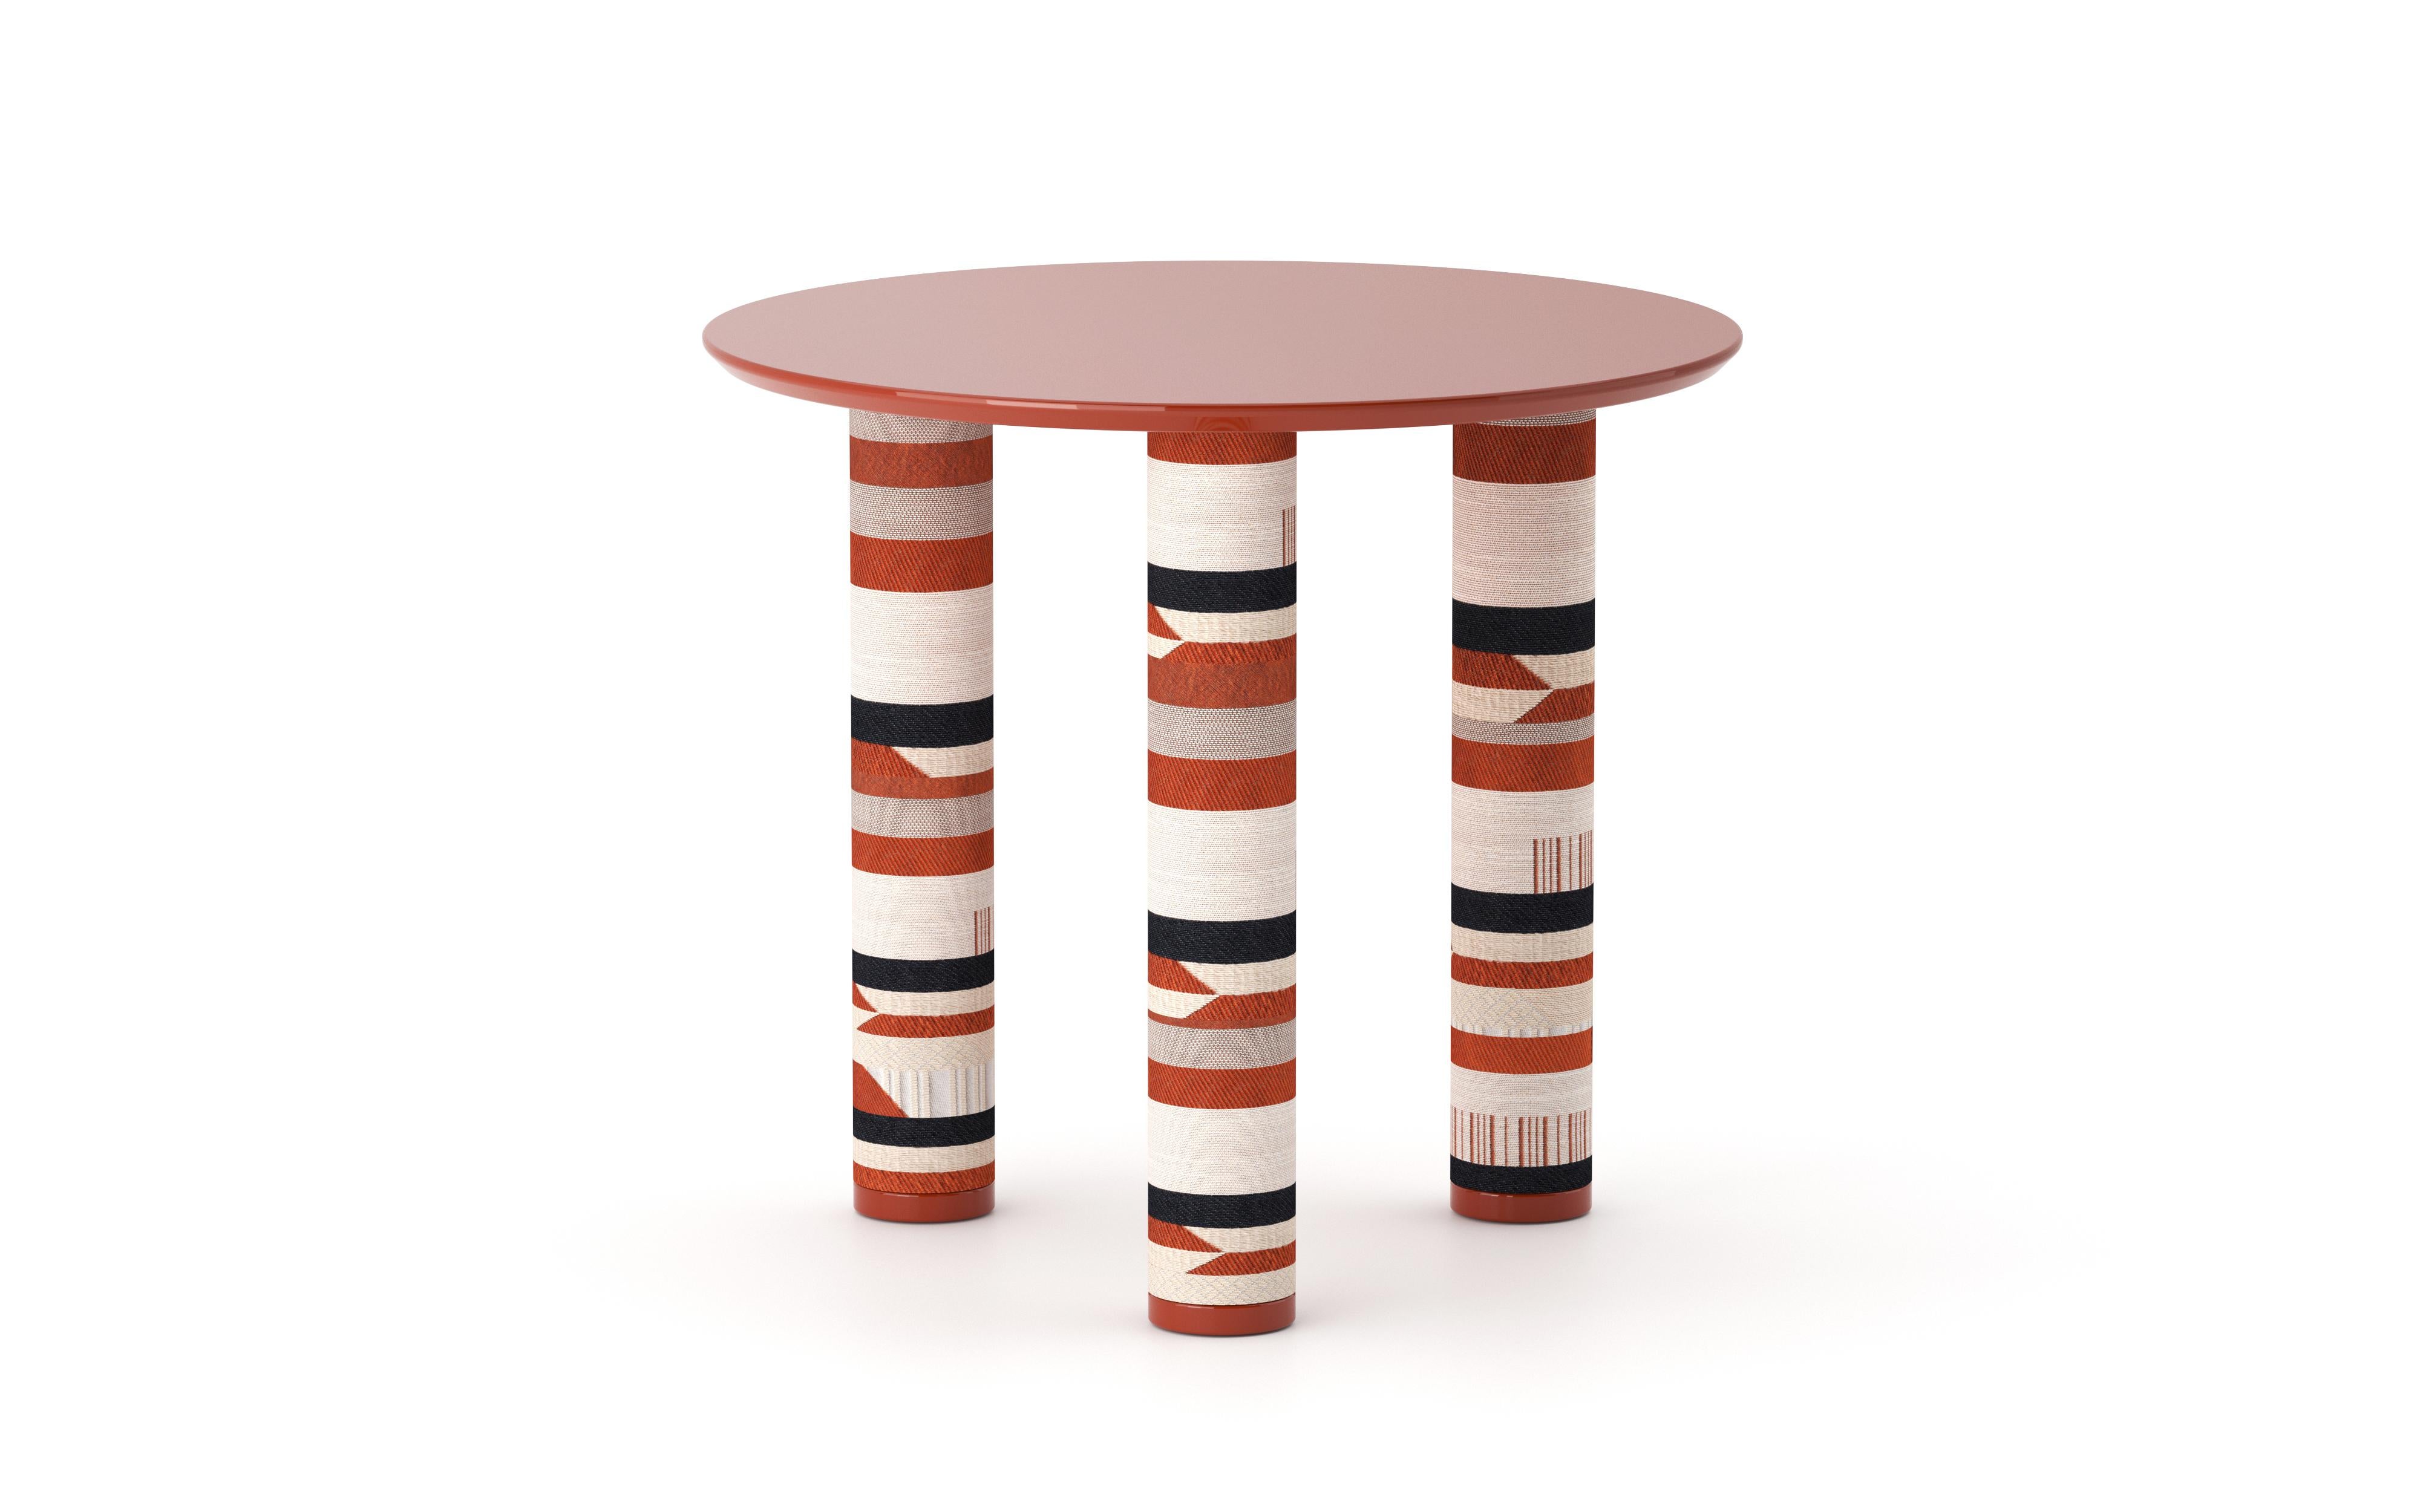 UMA Round 50 is the smallest low table from the collection of the same name designed by Ludovica+Roberto Palomba for P + C Edizioni in spring 2022.
Featuring a circular resin top, UMA Round 50 puts the design accent on the table’s cylindrical